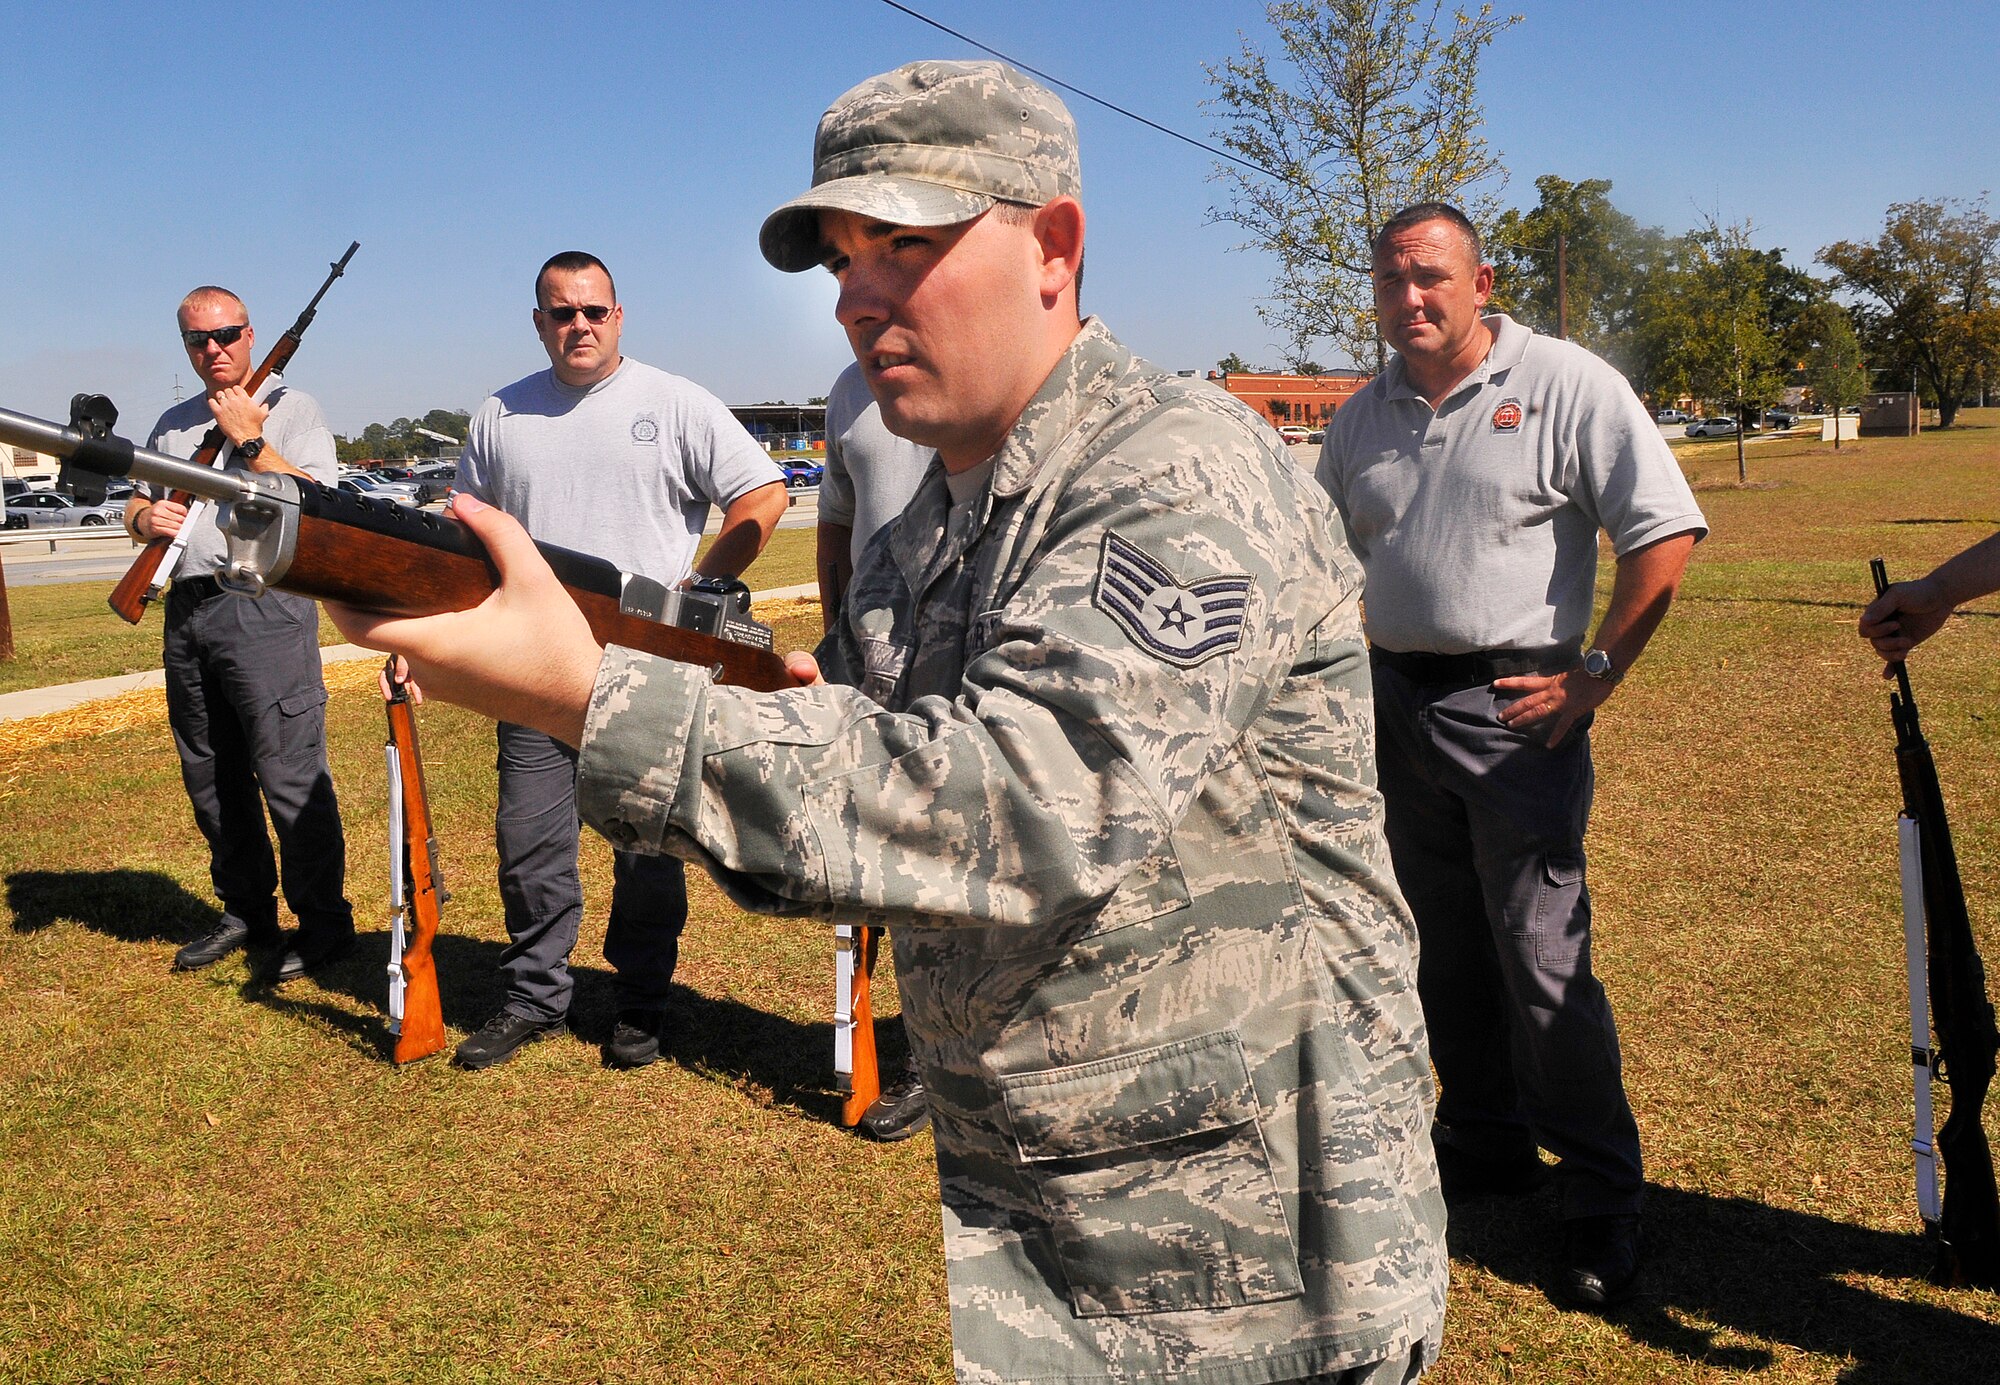 Staff Sgt. David Hart demonstrates a technique for Georgia State Patrolmen during firing party practice. Thirty One Georgia State Patrol honor guard members from around the state trained with the Robins Air Force Base Honor Guard Oct. 16-17. The GSP officers' goal was to improve techniques for their funeral and ceremonial services.(U. S. Air Force photo/Sue Sapp)